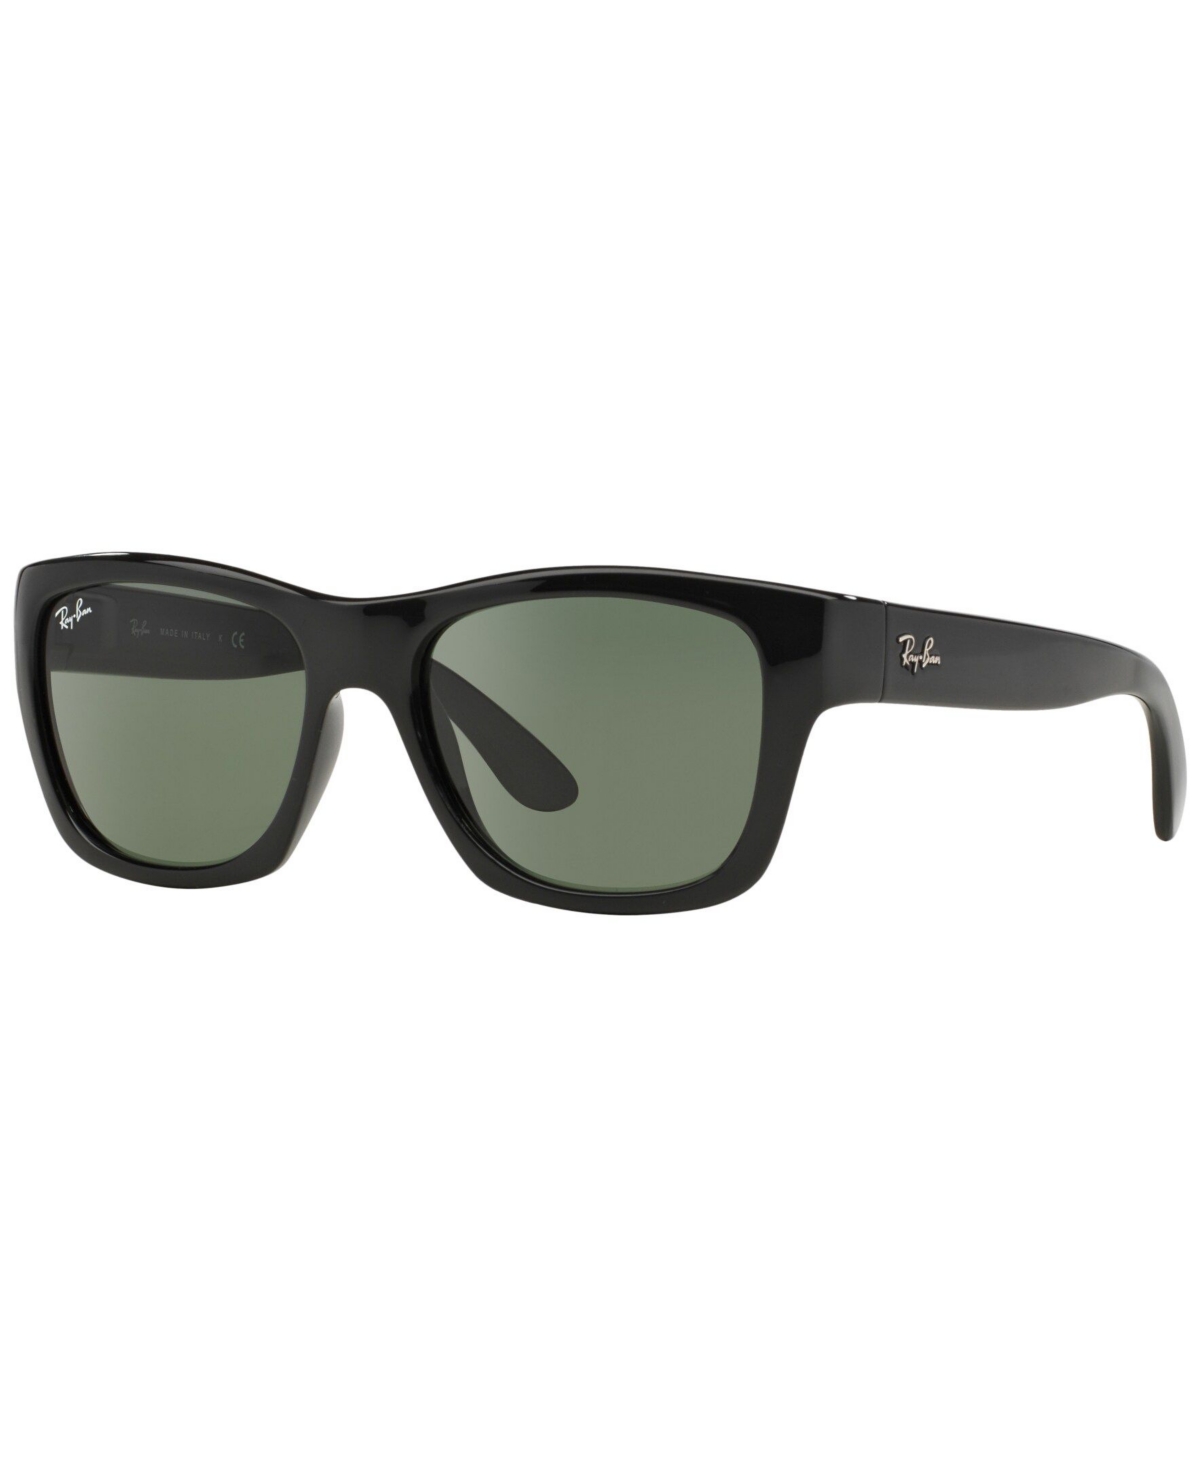 Ray Ban Unisex Sunglasses, Rb4194 53 In Black